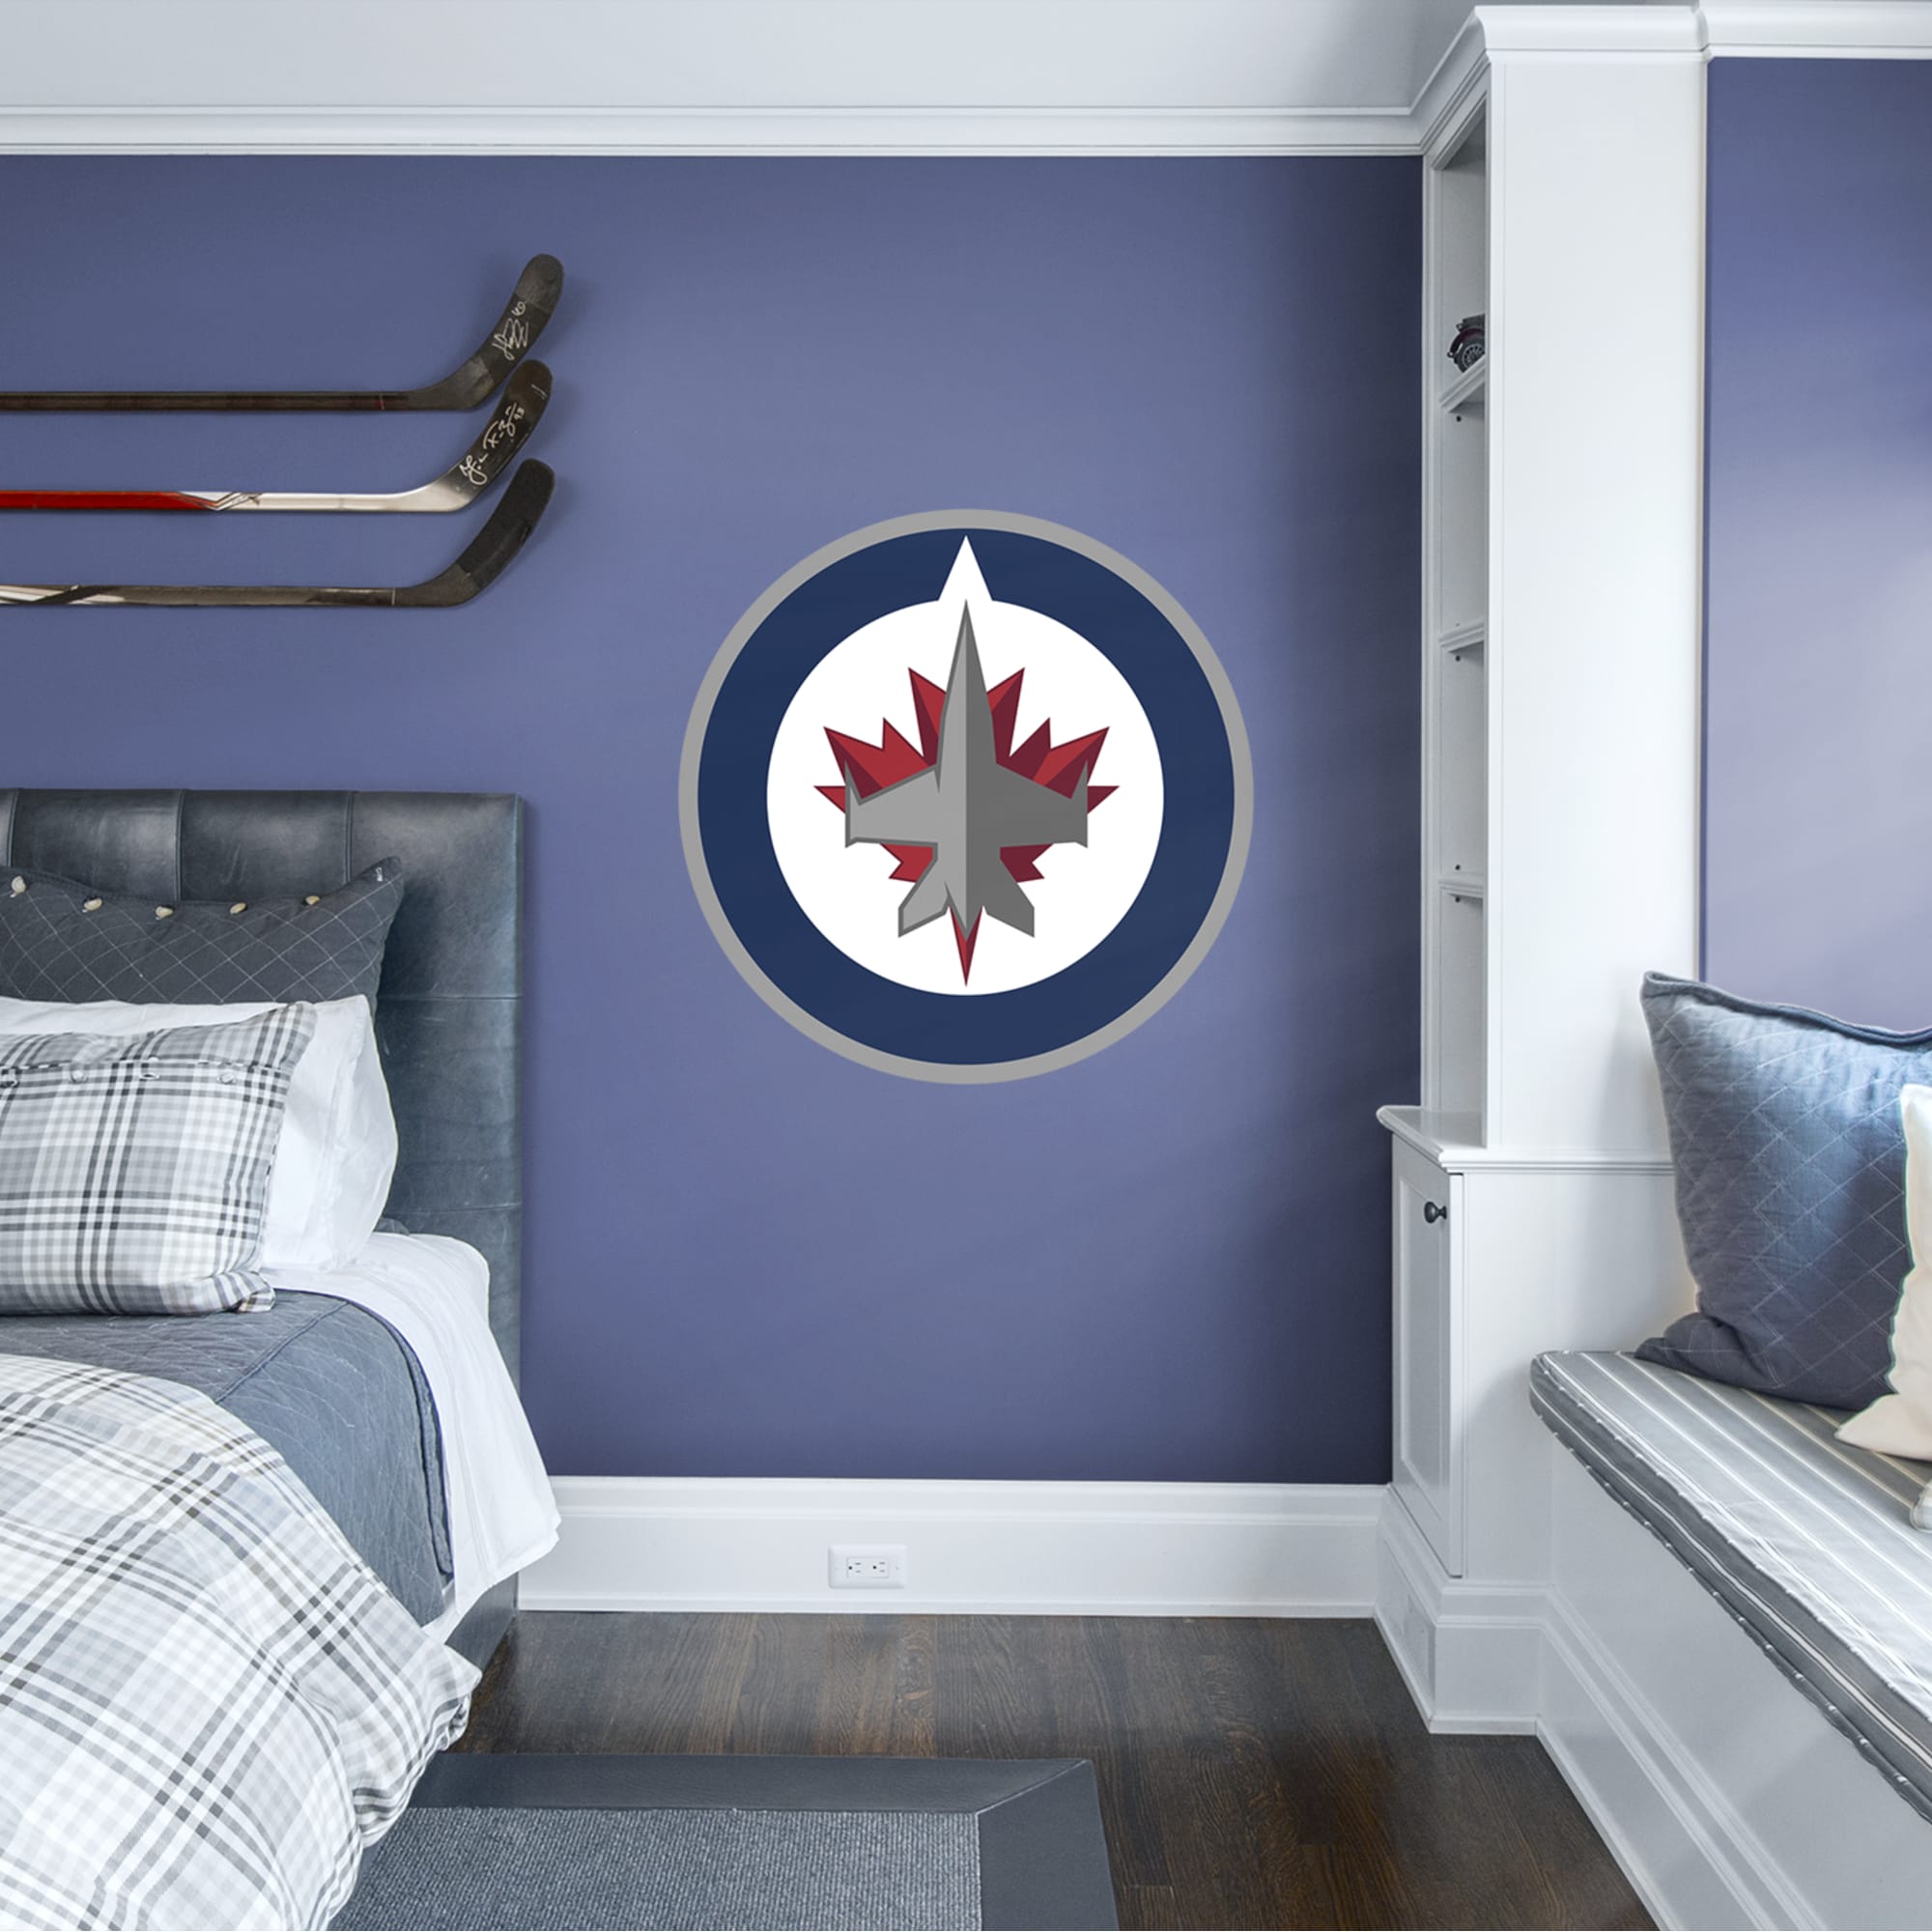 Winnipeg Jets: Logo - Officially Licensed NHL Removable Wall Decal 38.0"W x 38.0"H by Fathead | Vinyl